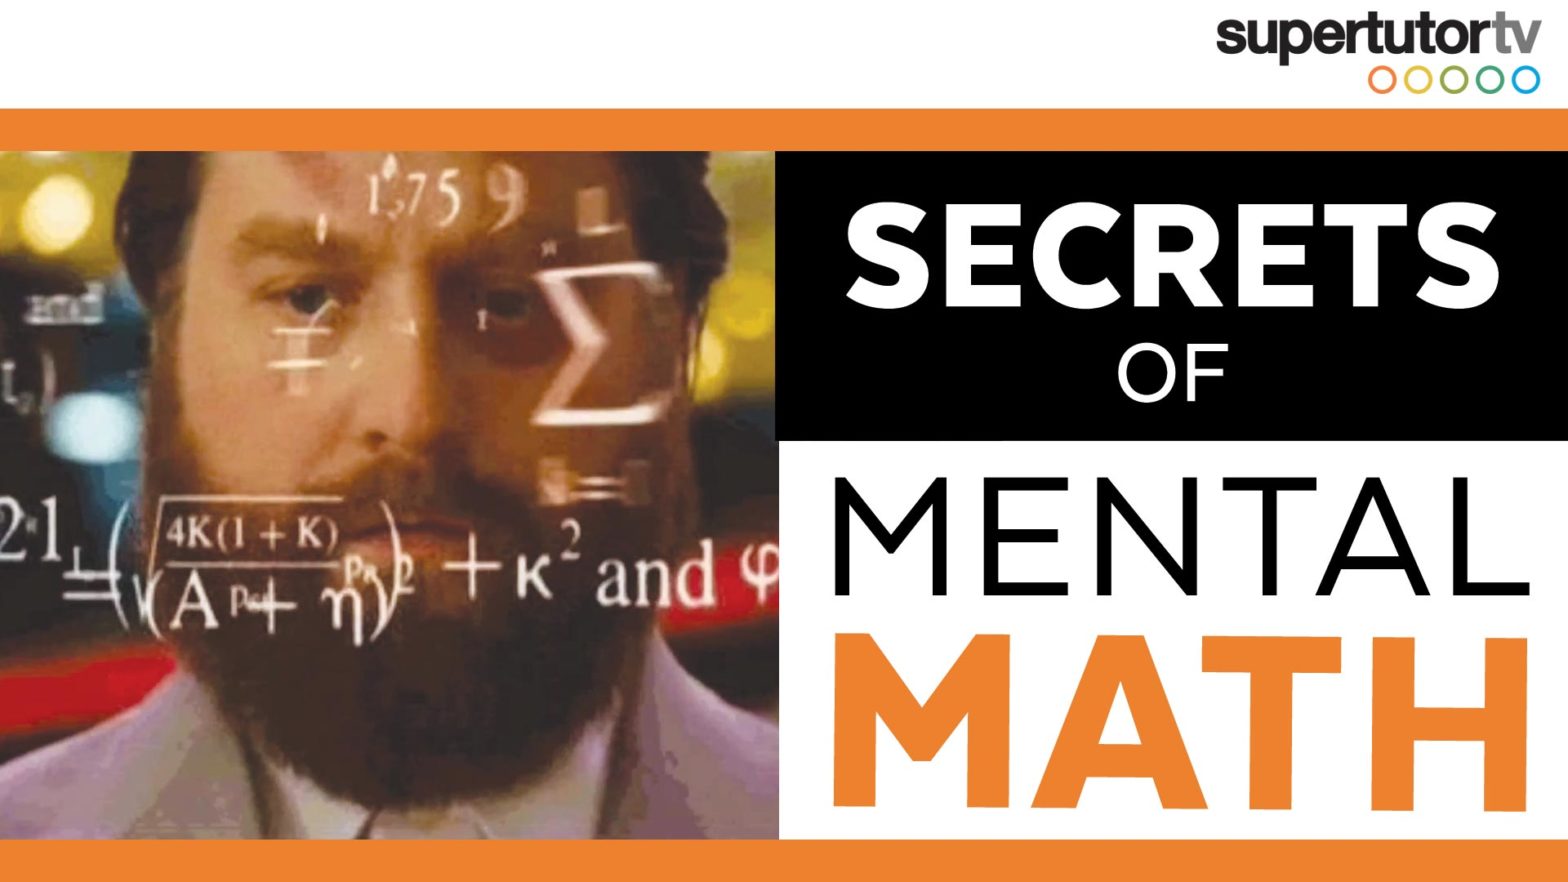 Mental Math Secrets: 3 Ways to Up Your Mental Math Game